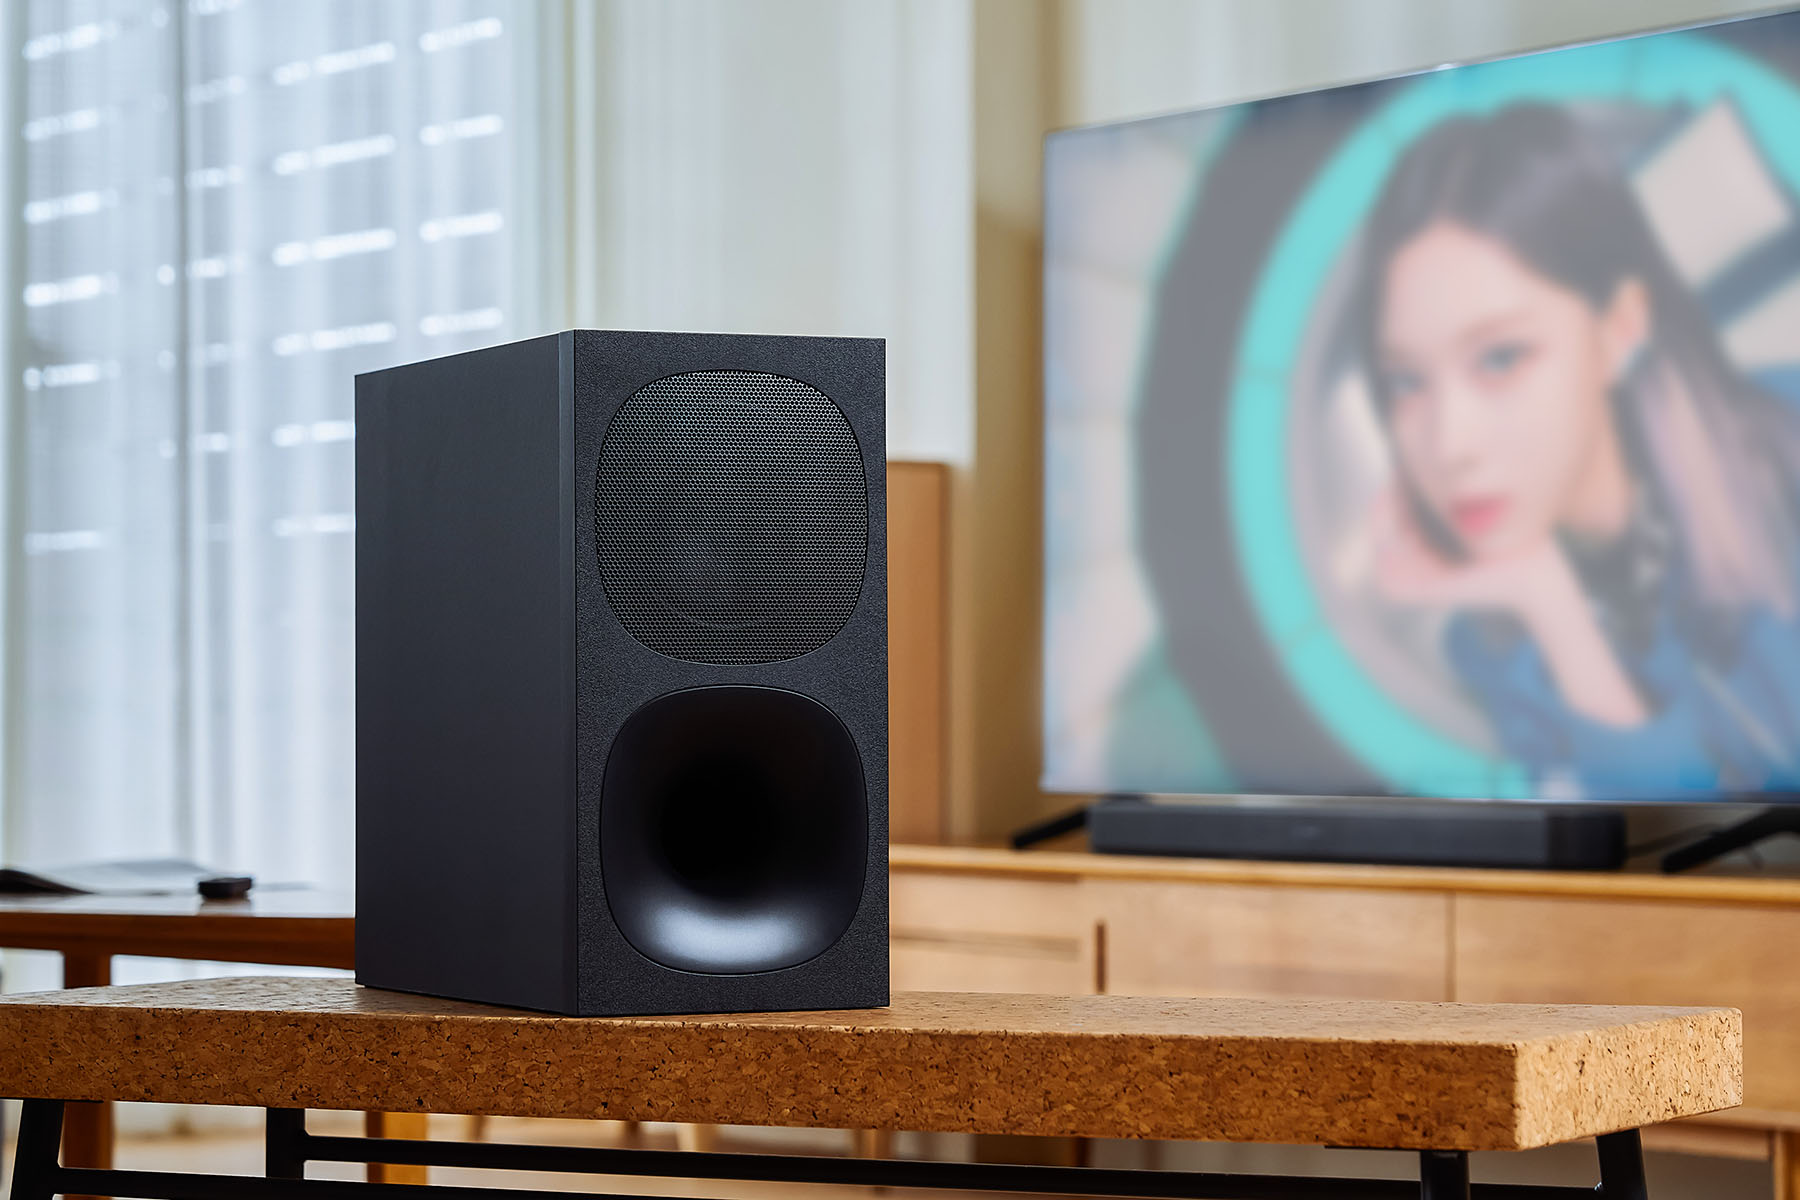 Compared with the low-key and stable soundbar, the active subwoofer of the HT-S400 is extremely eye-catching. Among the products of the same distance, the size of the box should be considered one of the best, and the weight is 7.3 kg, which is almost equivalent to an M- The size of the ATX computer case also ensures a larger resonance space, which can create a deeper and deeper bass performance.